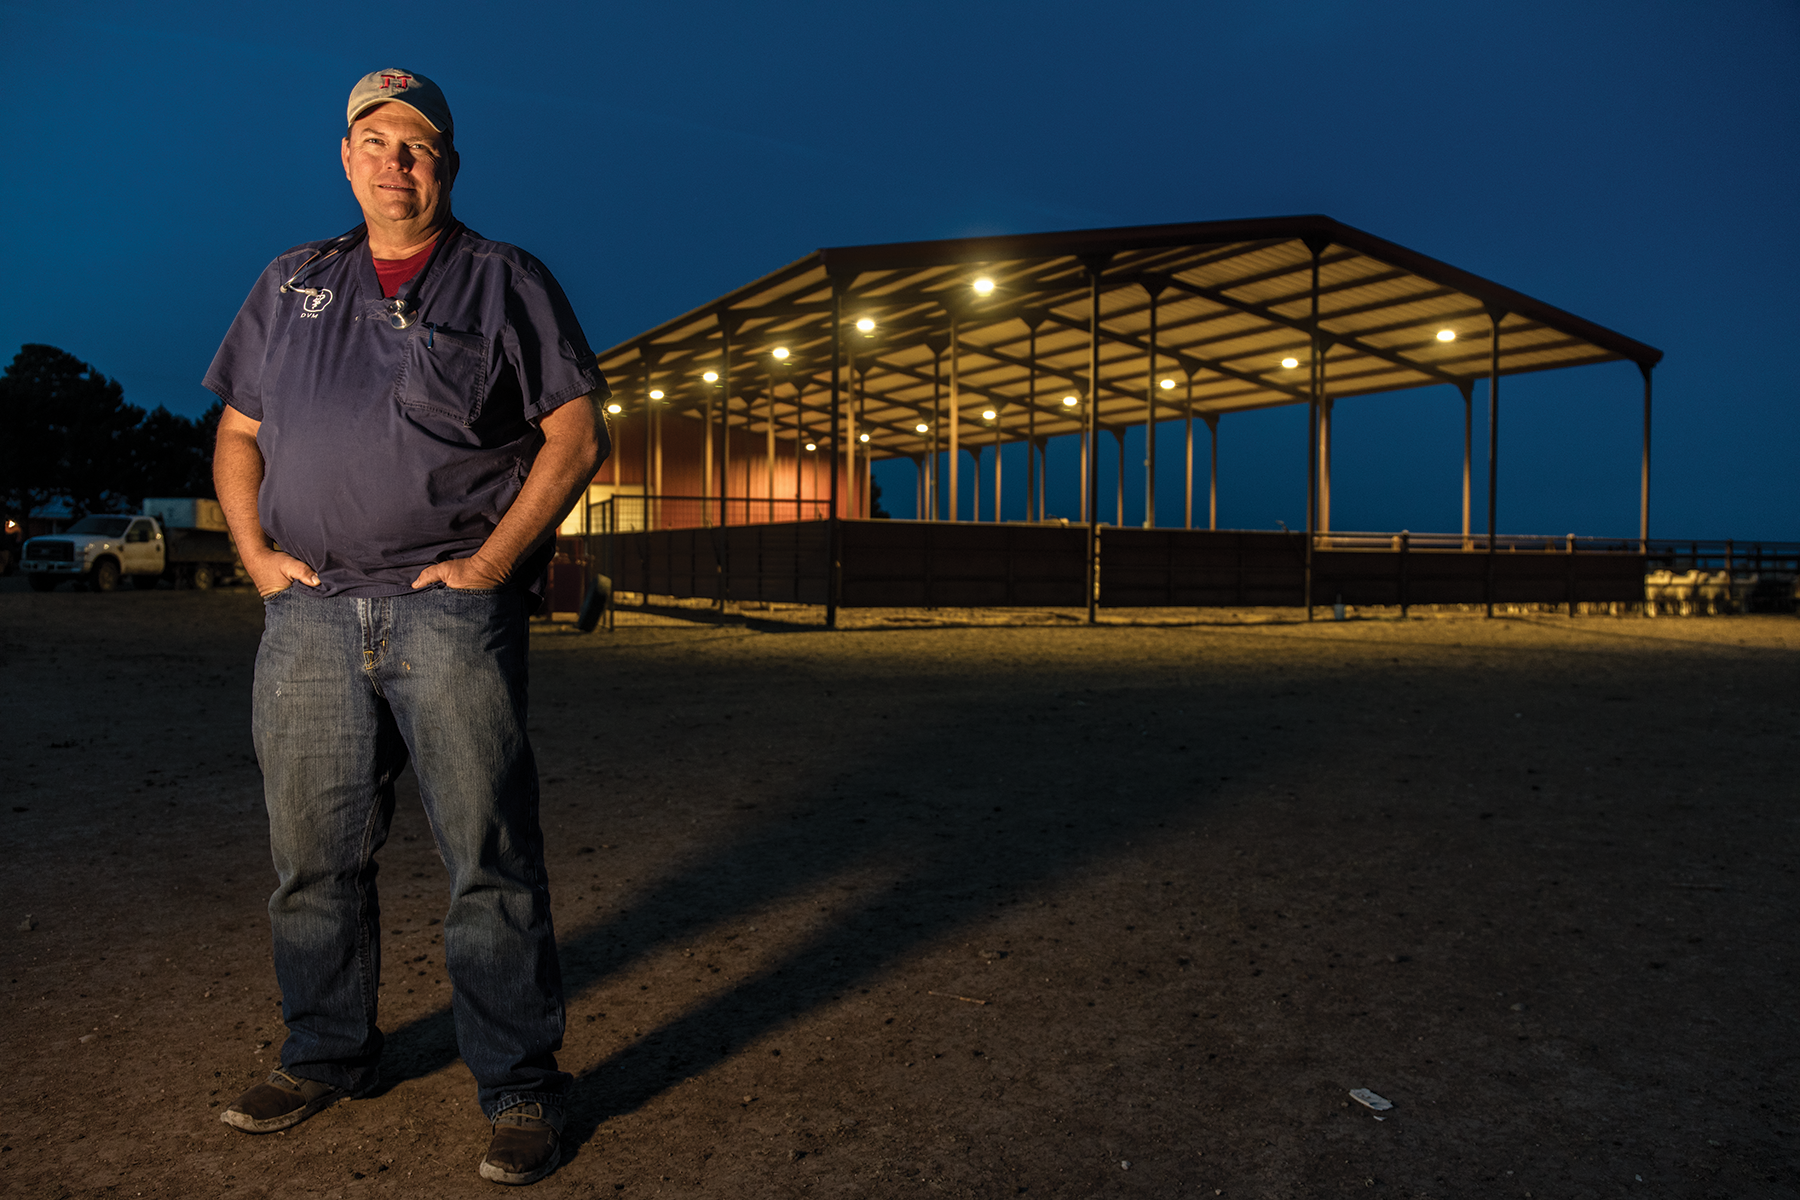 Chris Grotegut is a veterinarian whose property is a half-mile from a proposed feedlot that would bring an additional 50,000 head of cattle to the area.